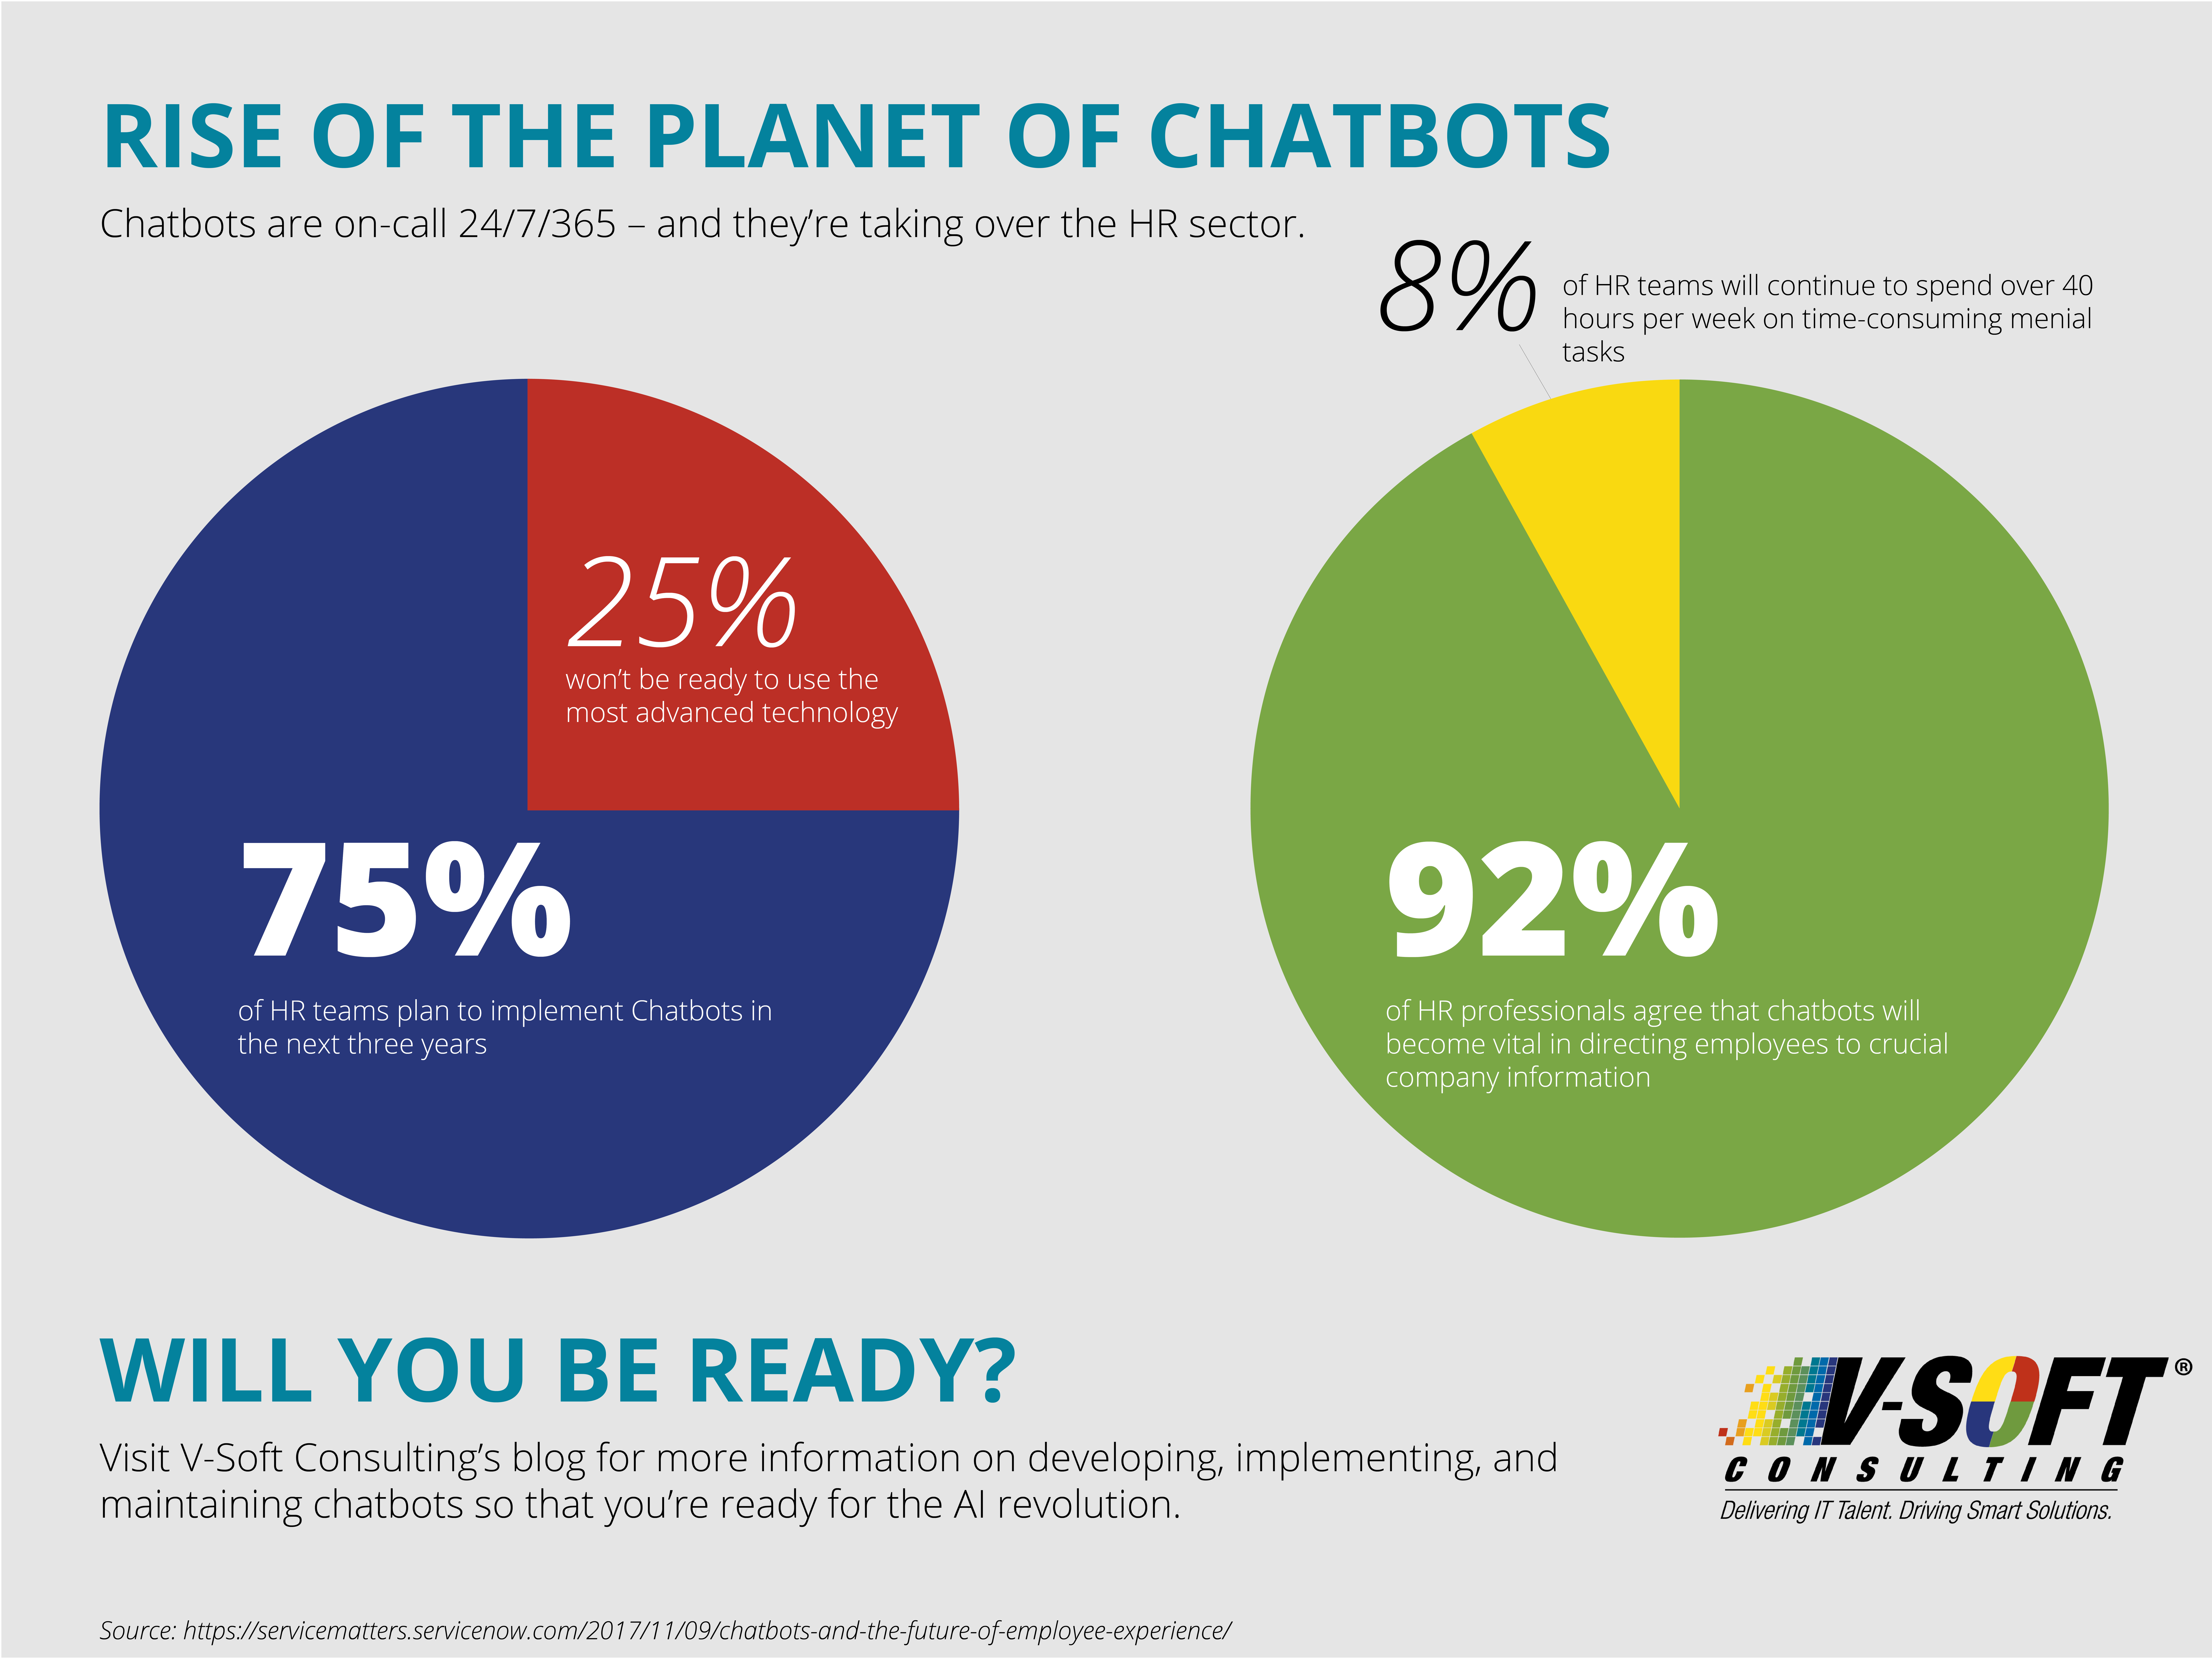 A graph on the statistics of chatbots within the HR sector.